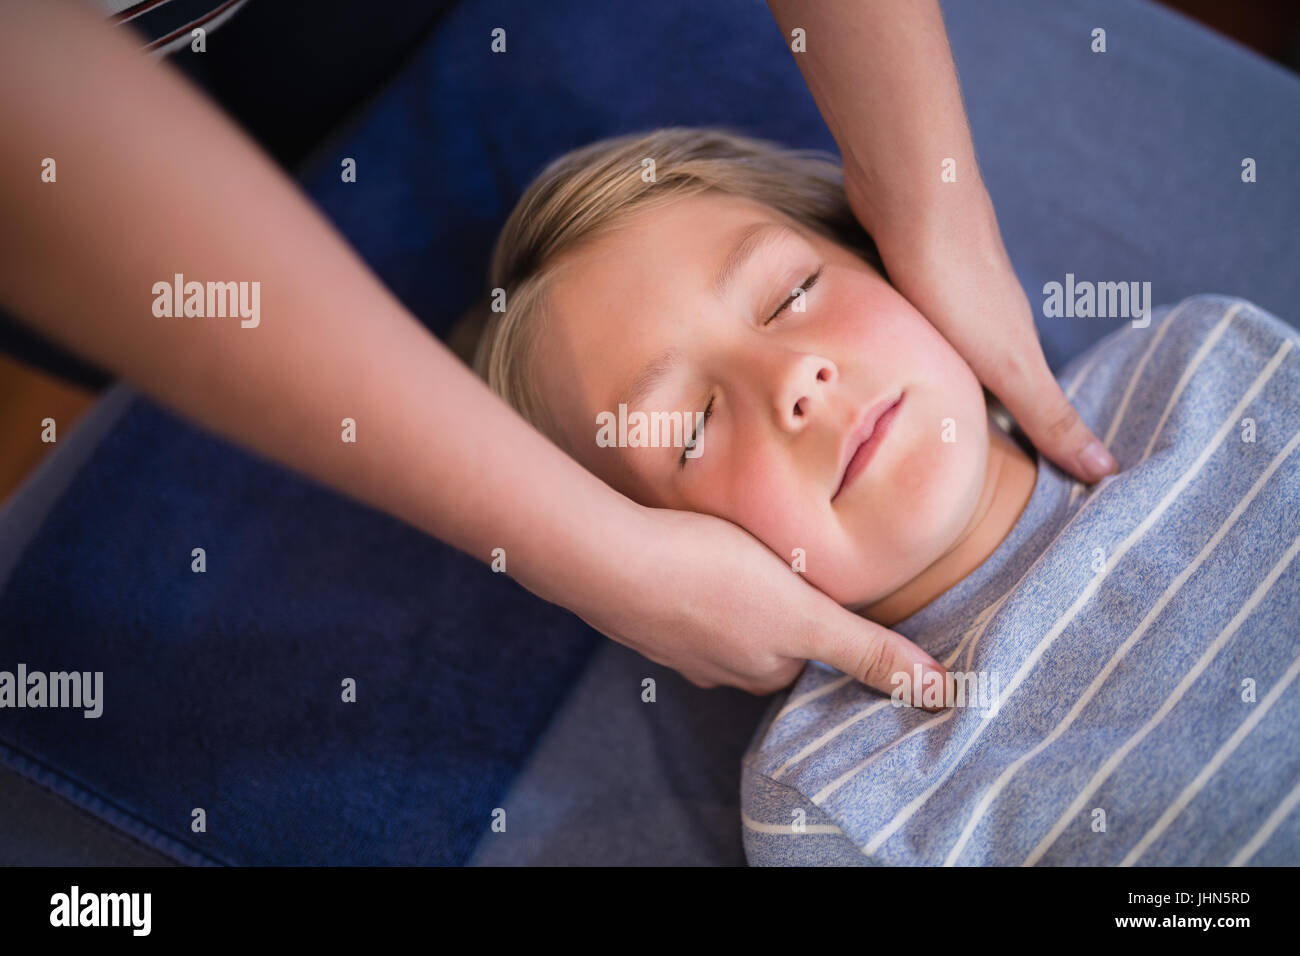 Boy lying with eyes closed receiving neck massage from female therapist at hospital ward Stock Photo